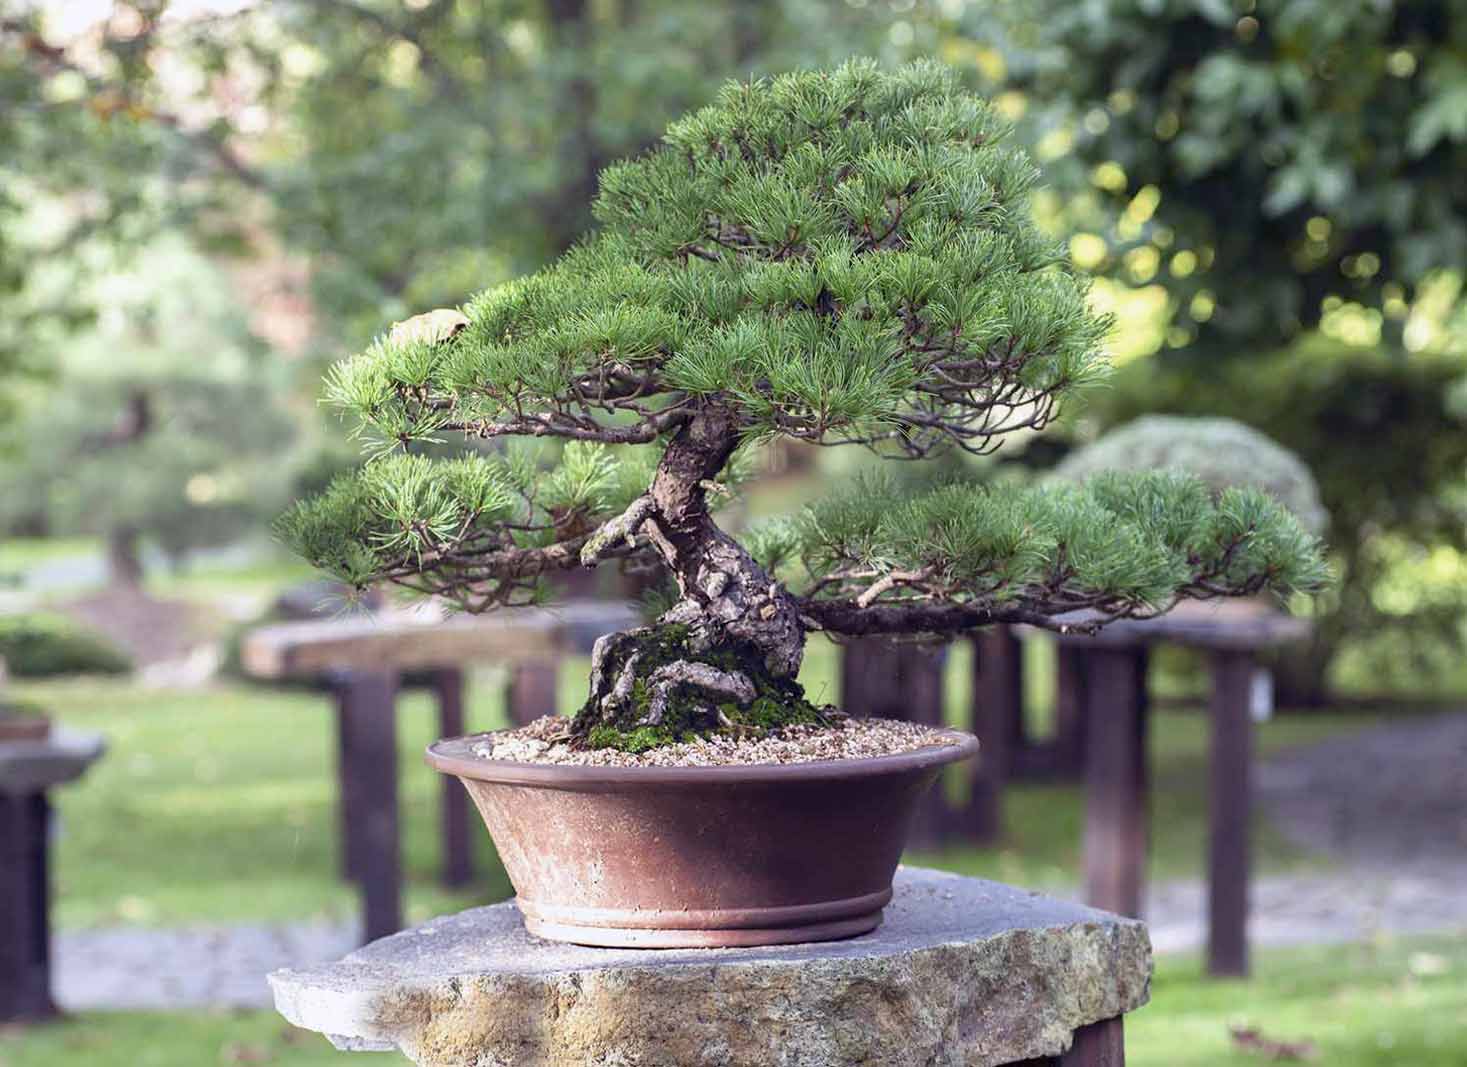 A picture of a pine tree suitable for bonsai